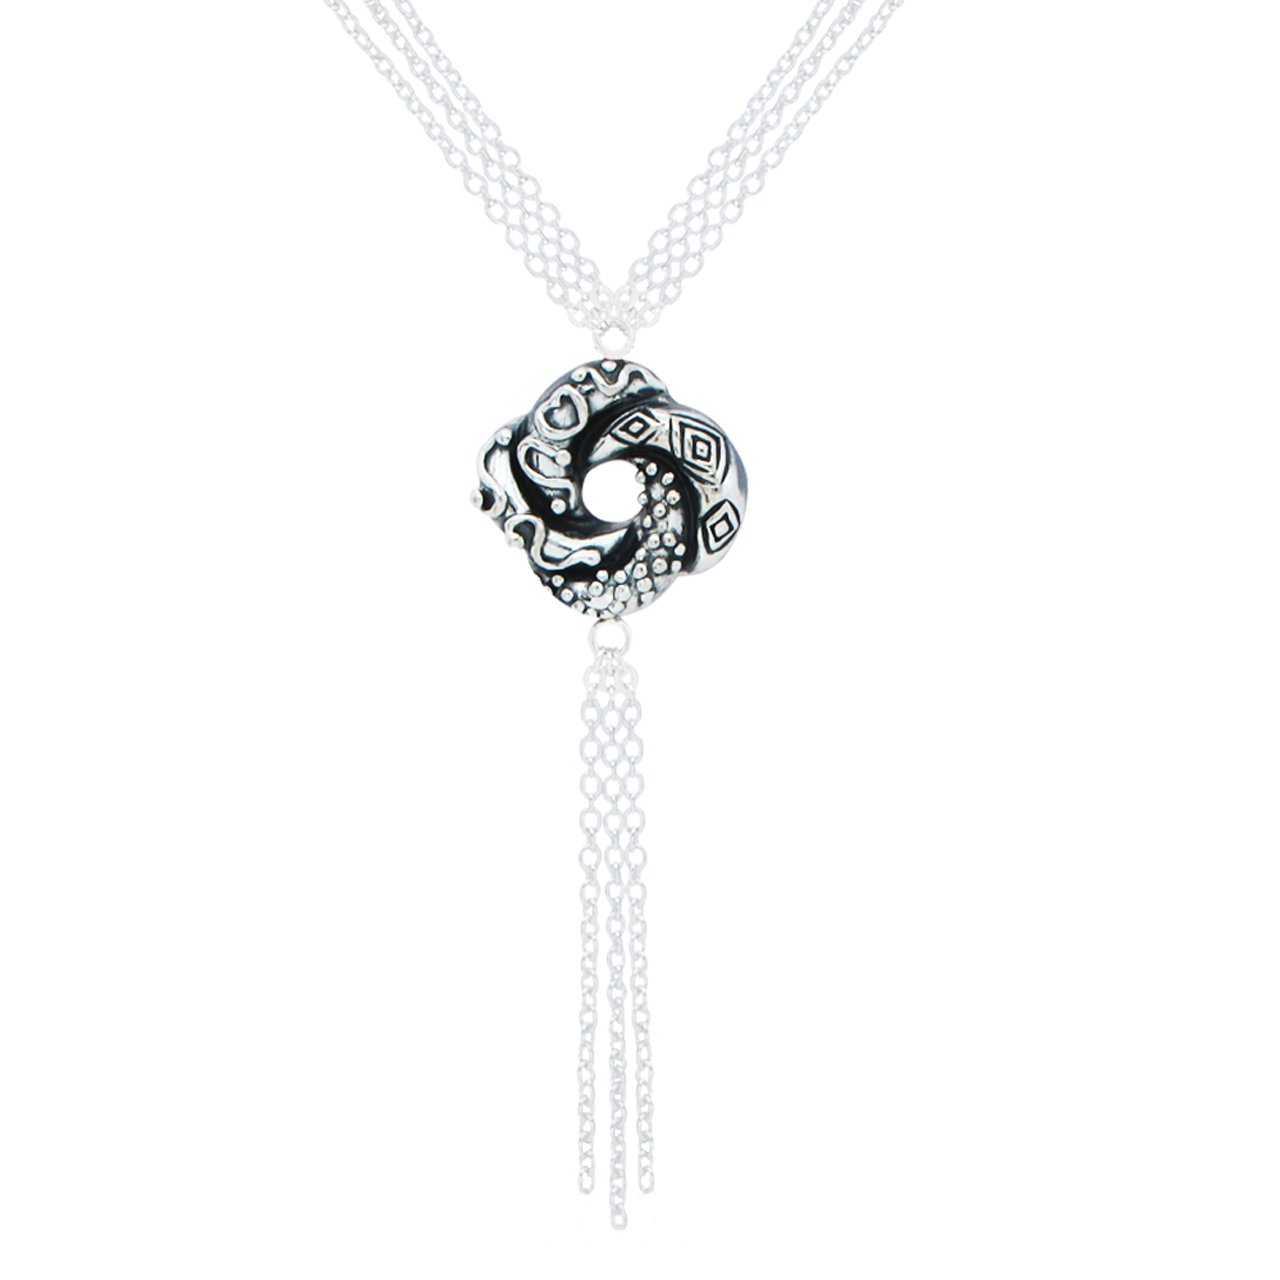 Fat Knot Silver Necklace | Stylish necklace with a knot | Mila Silver